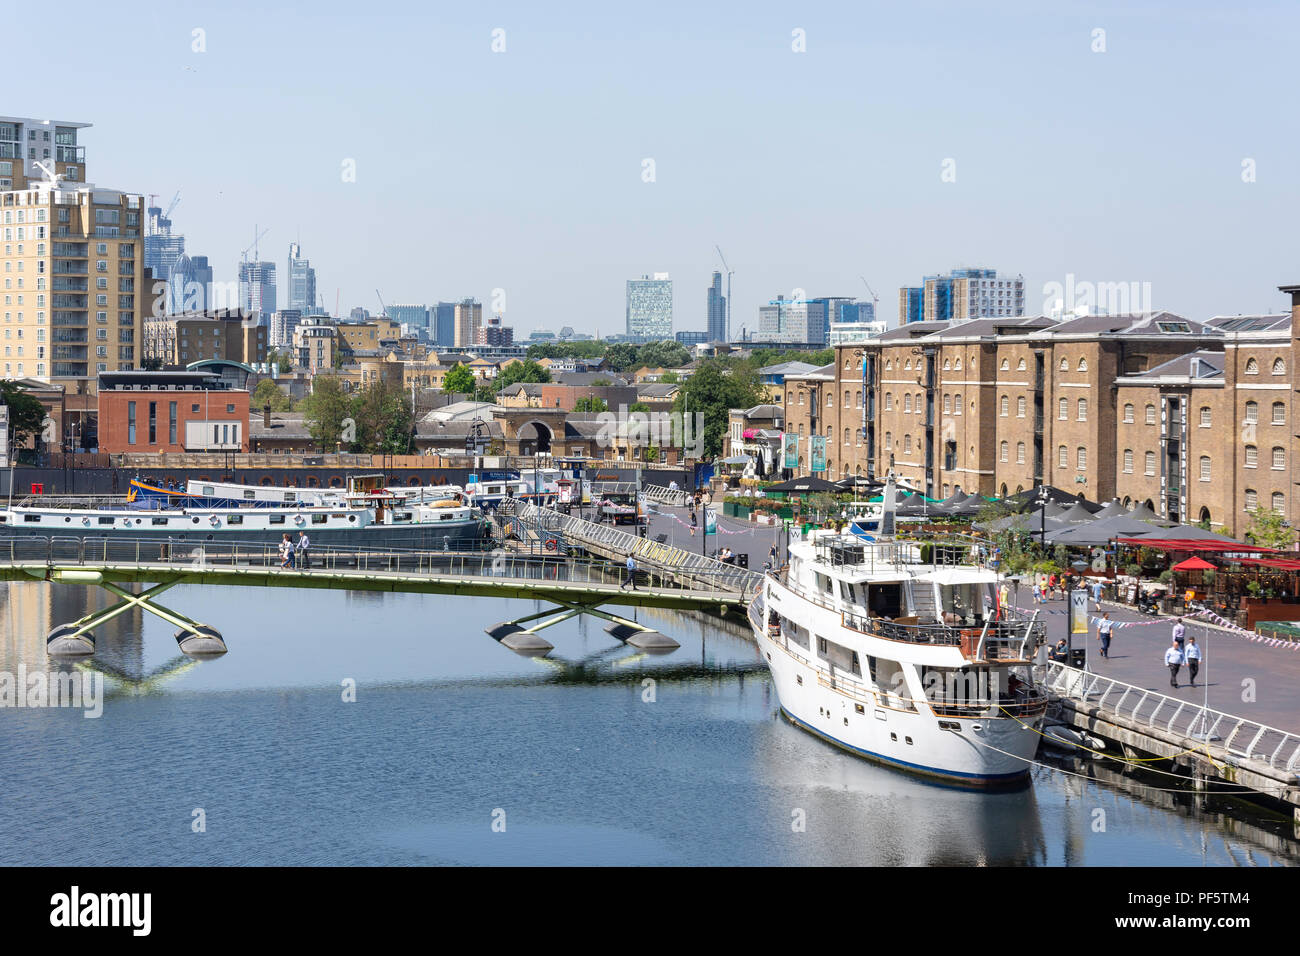 Au nord du Canal Dock, Canary Wharf, London Borough de Tower Hamlets, Greater London, Angleterre, Royaume-Uni Banque D'Images